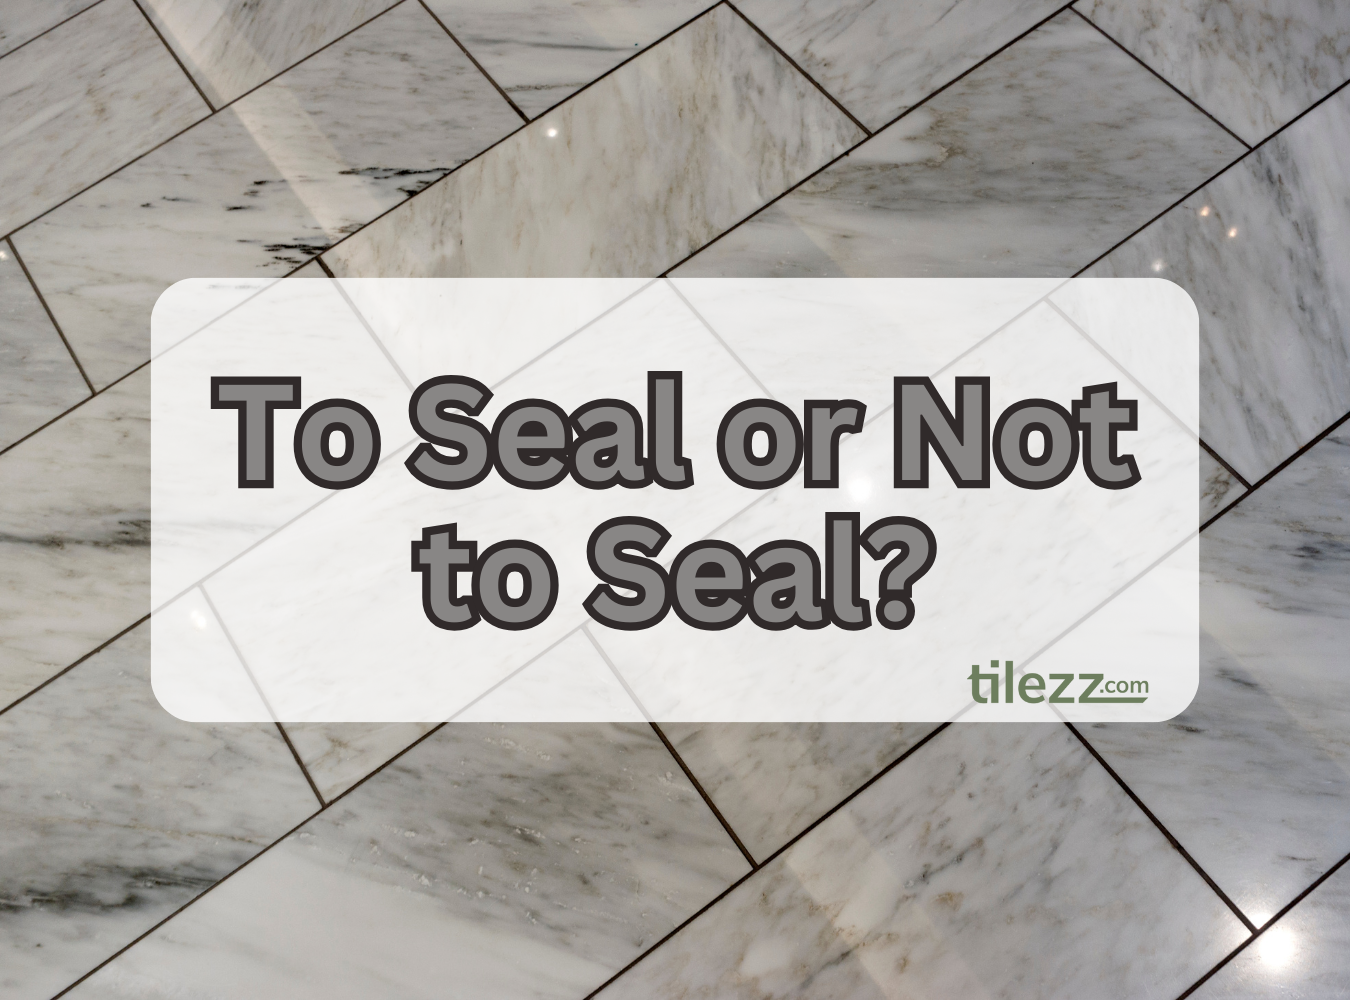 To Seal or Not to Seal?